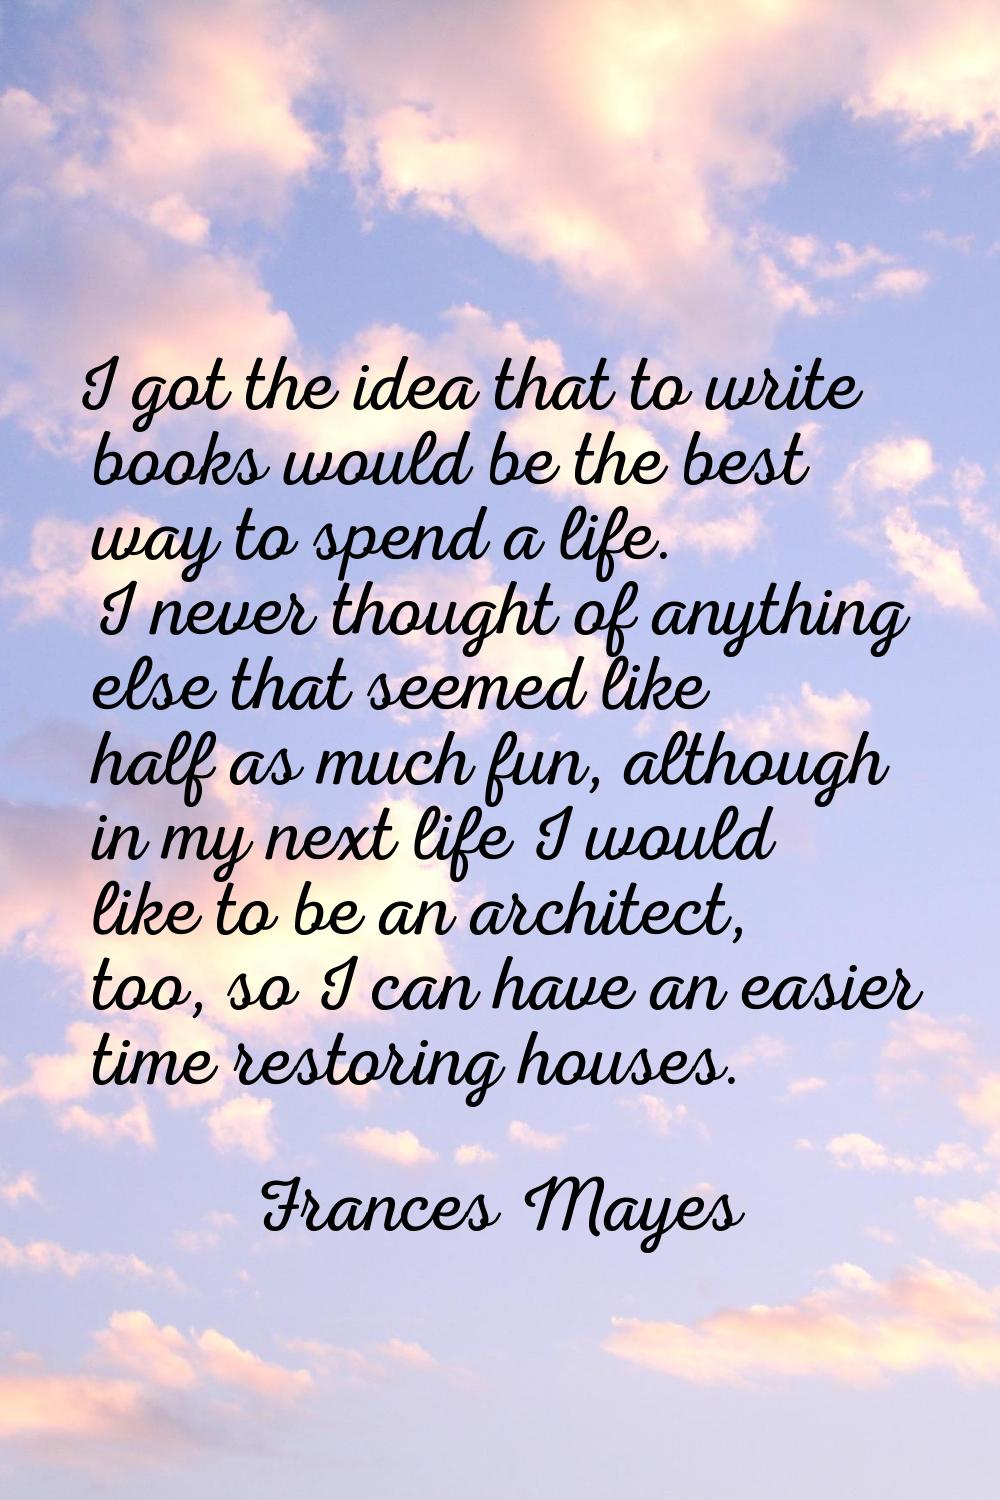 I got the idea that to write books would be the best way to spend a life. I never thought of anythi